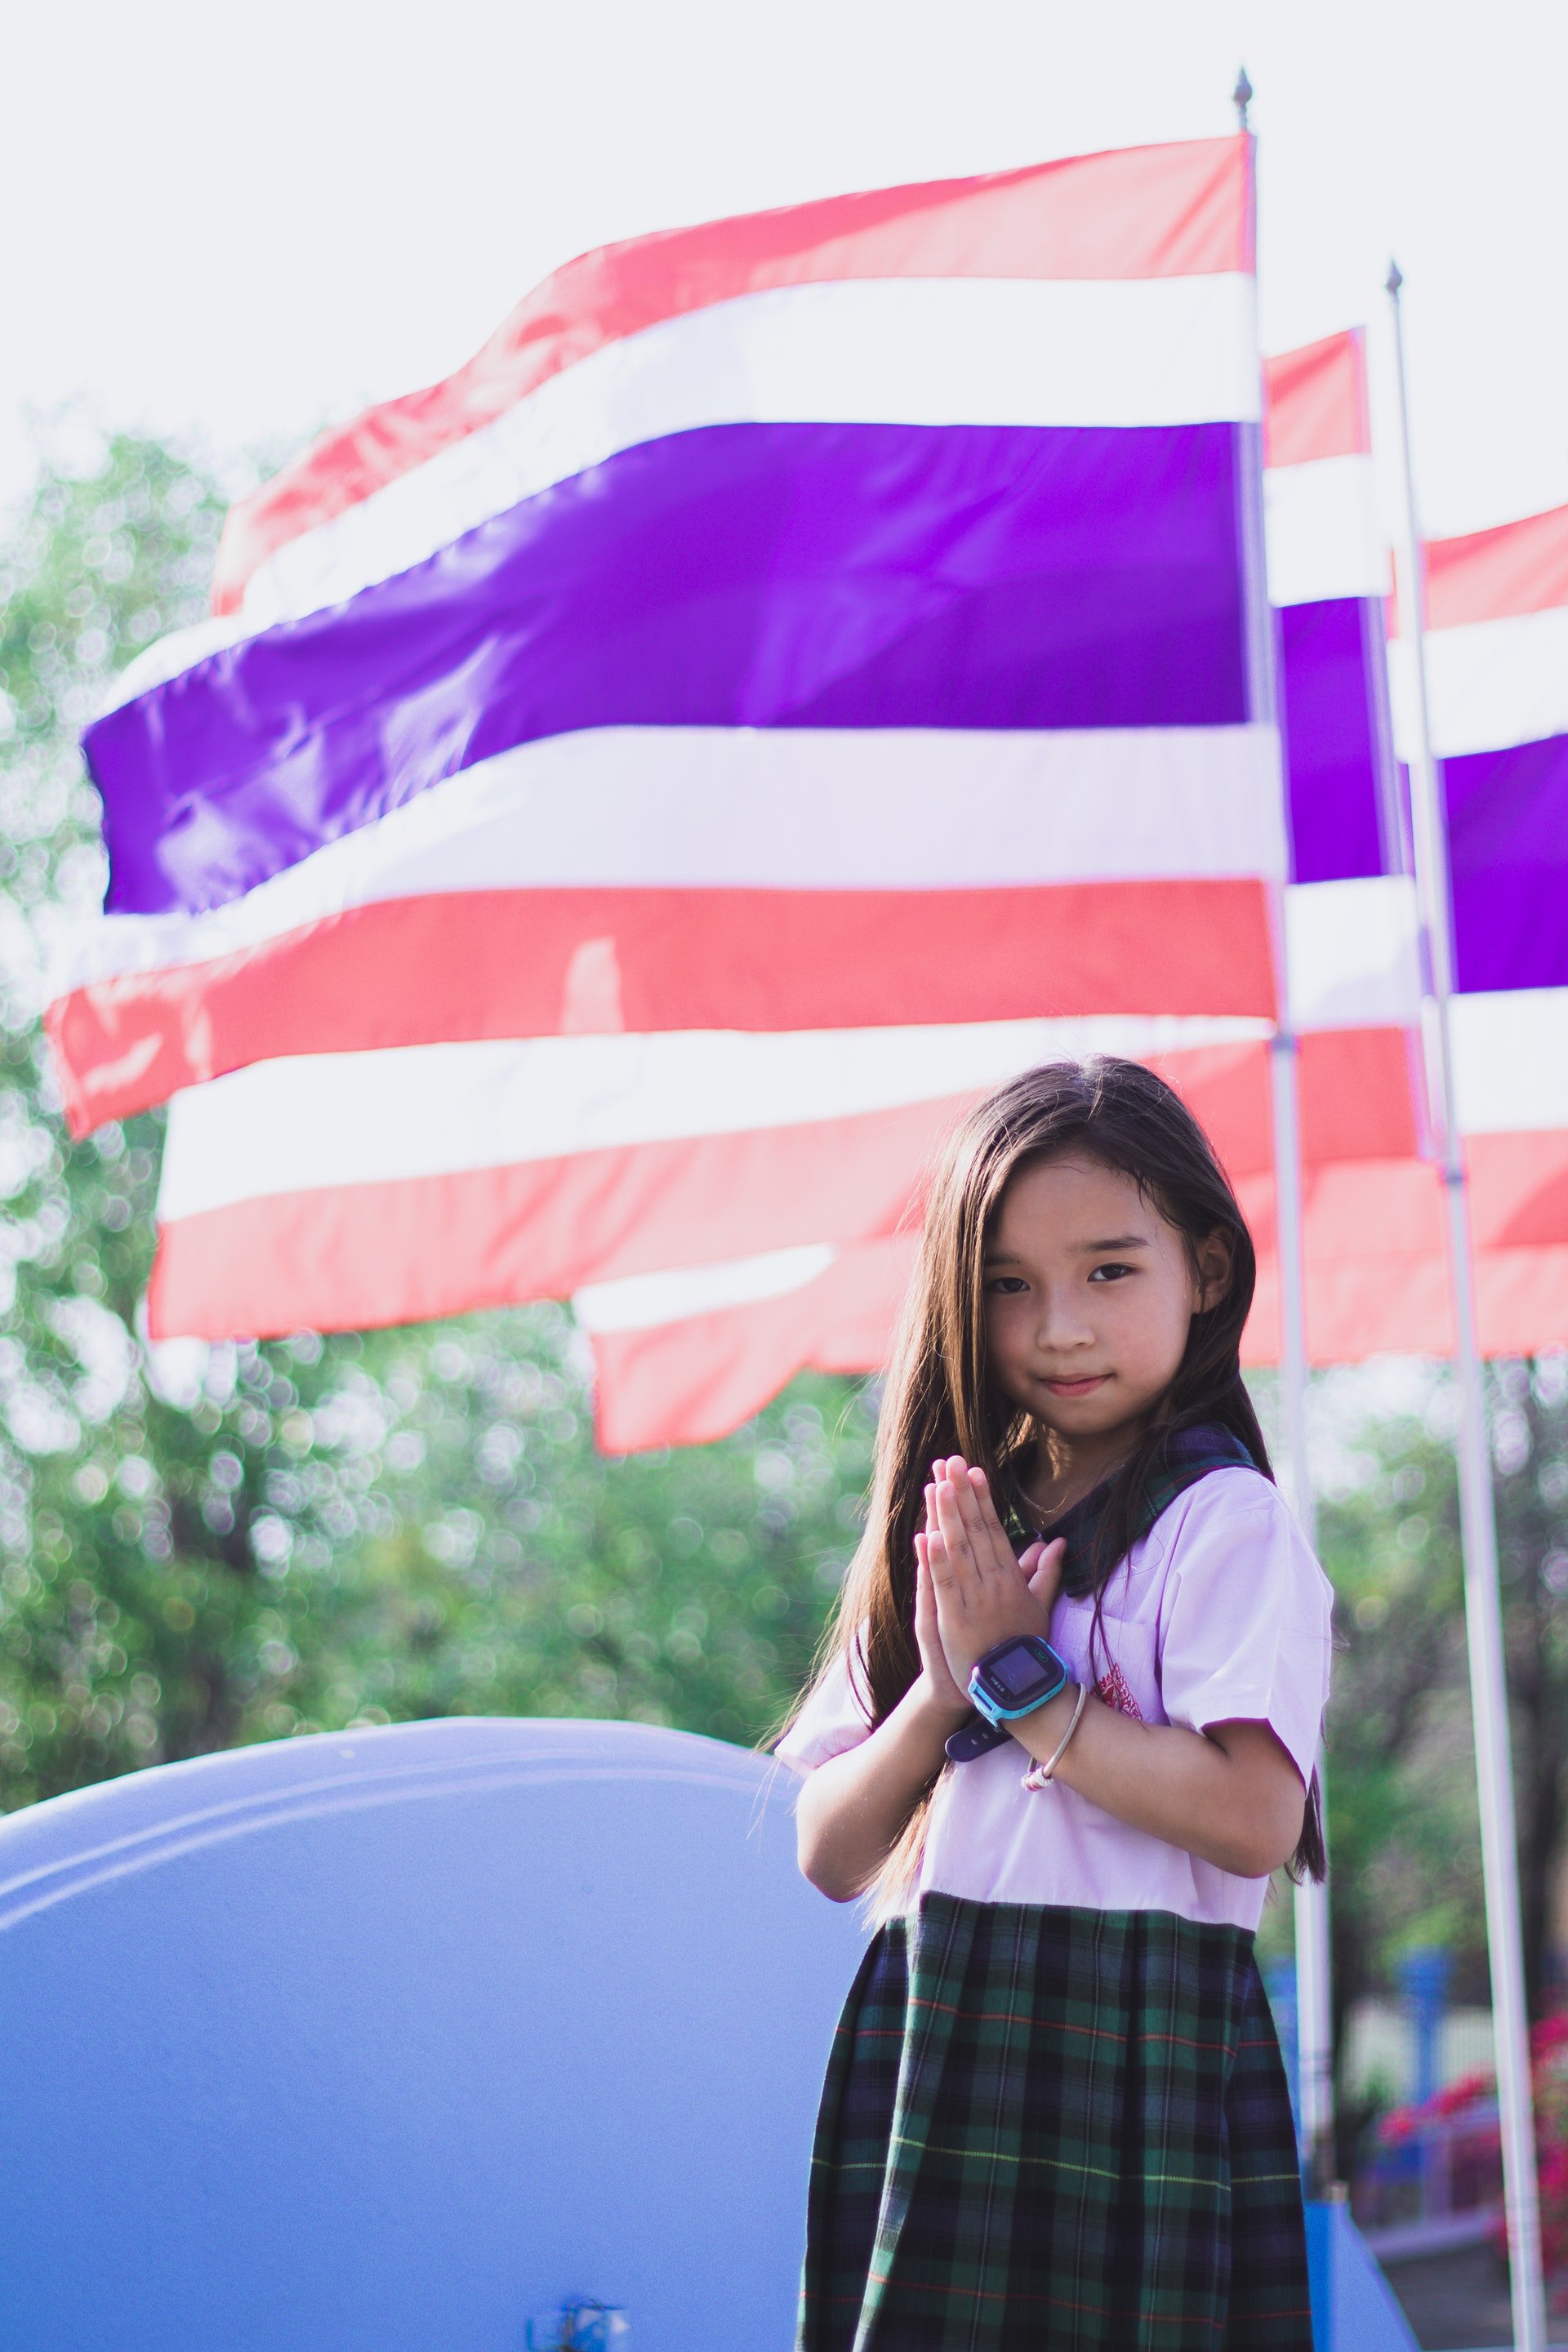 Photo of a young girl praying | Photo: Pexels